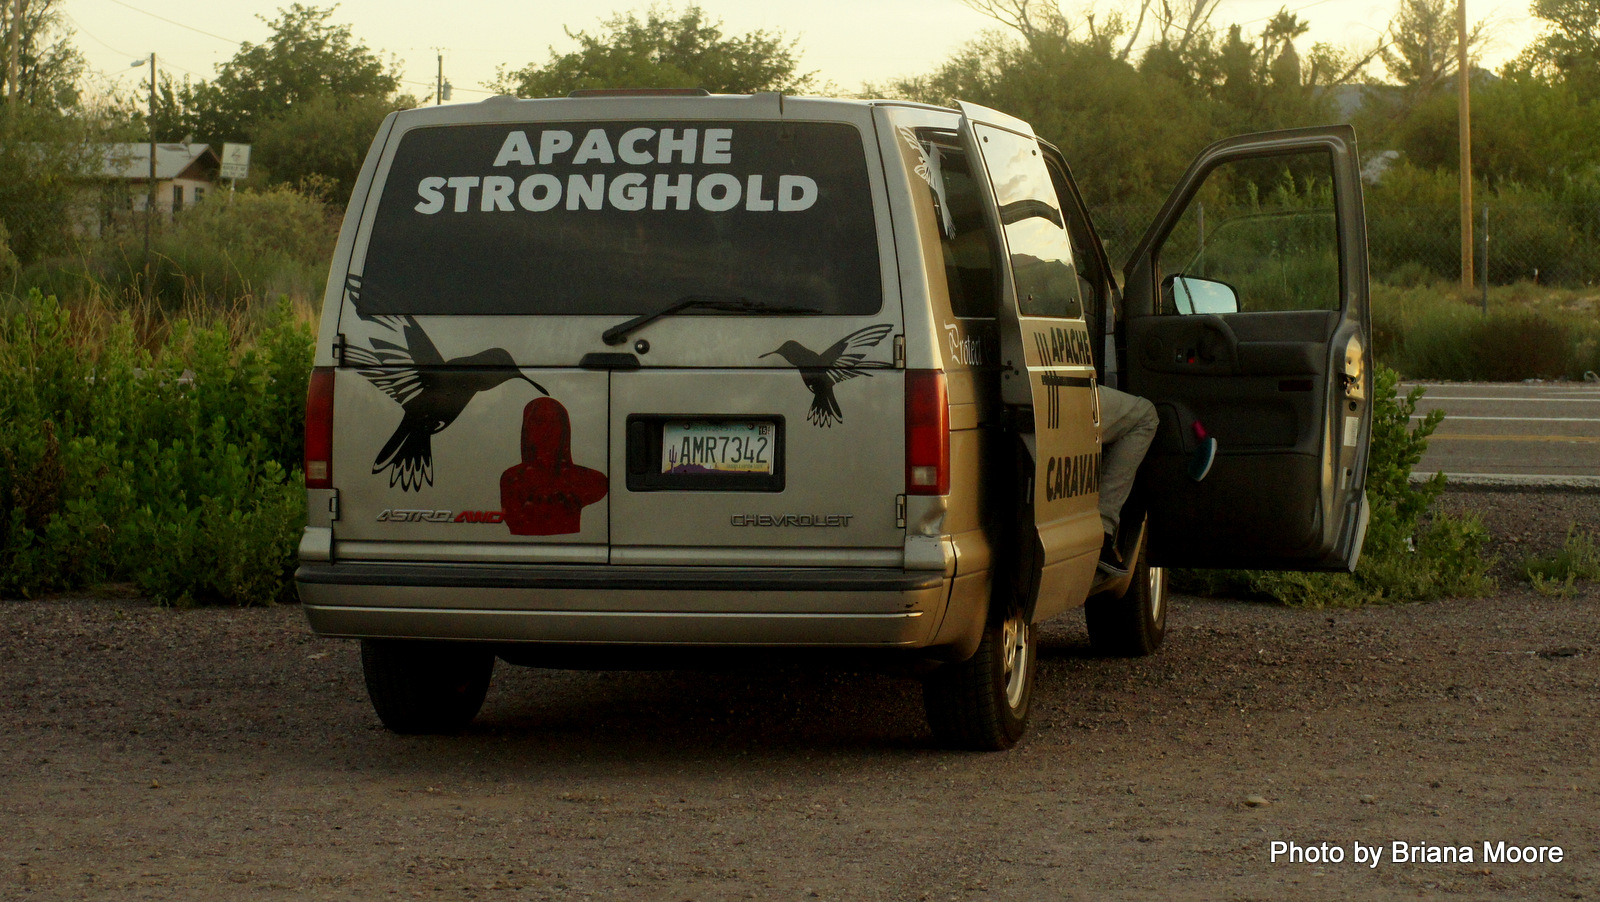 The Apache Stronghold van carried activists across the country to Washington.